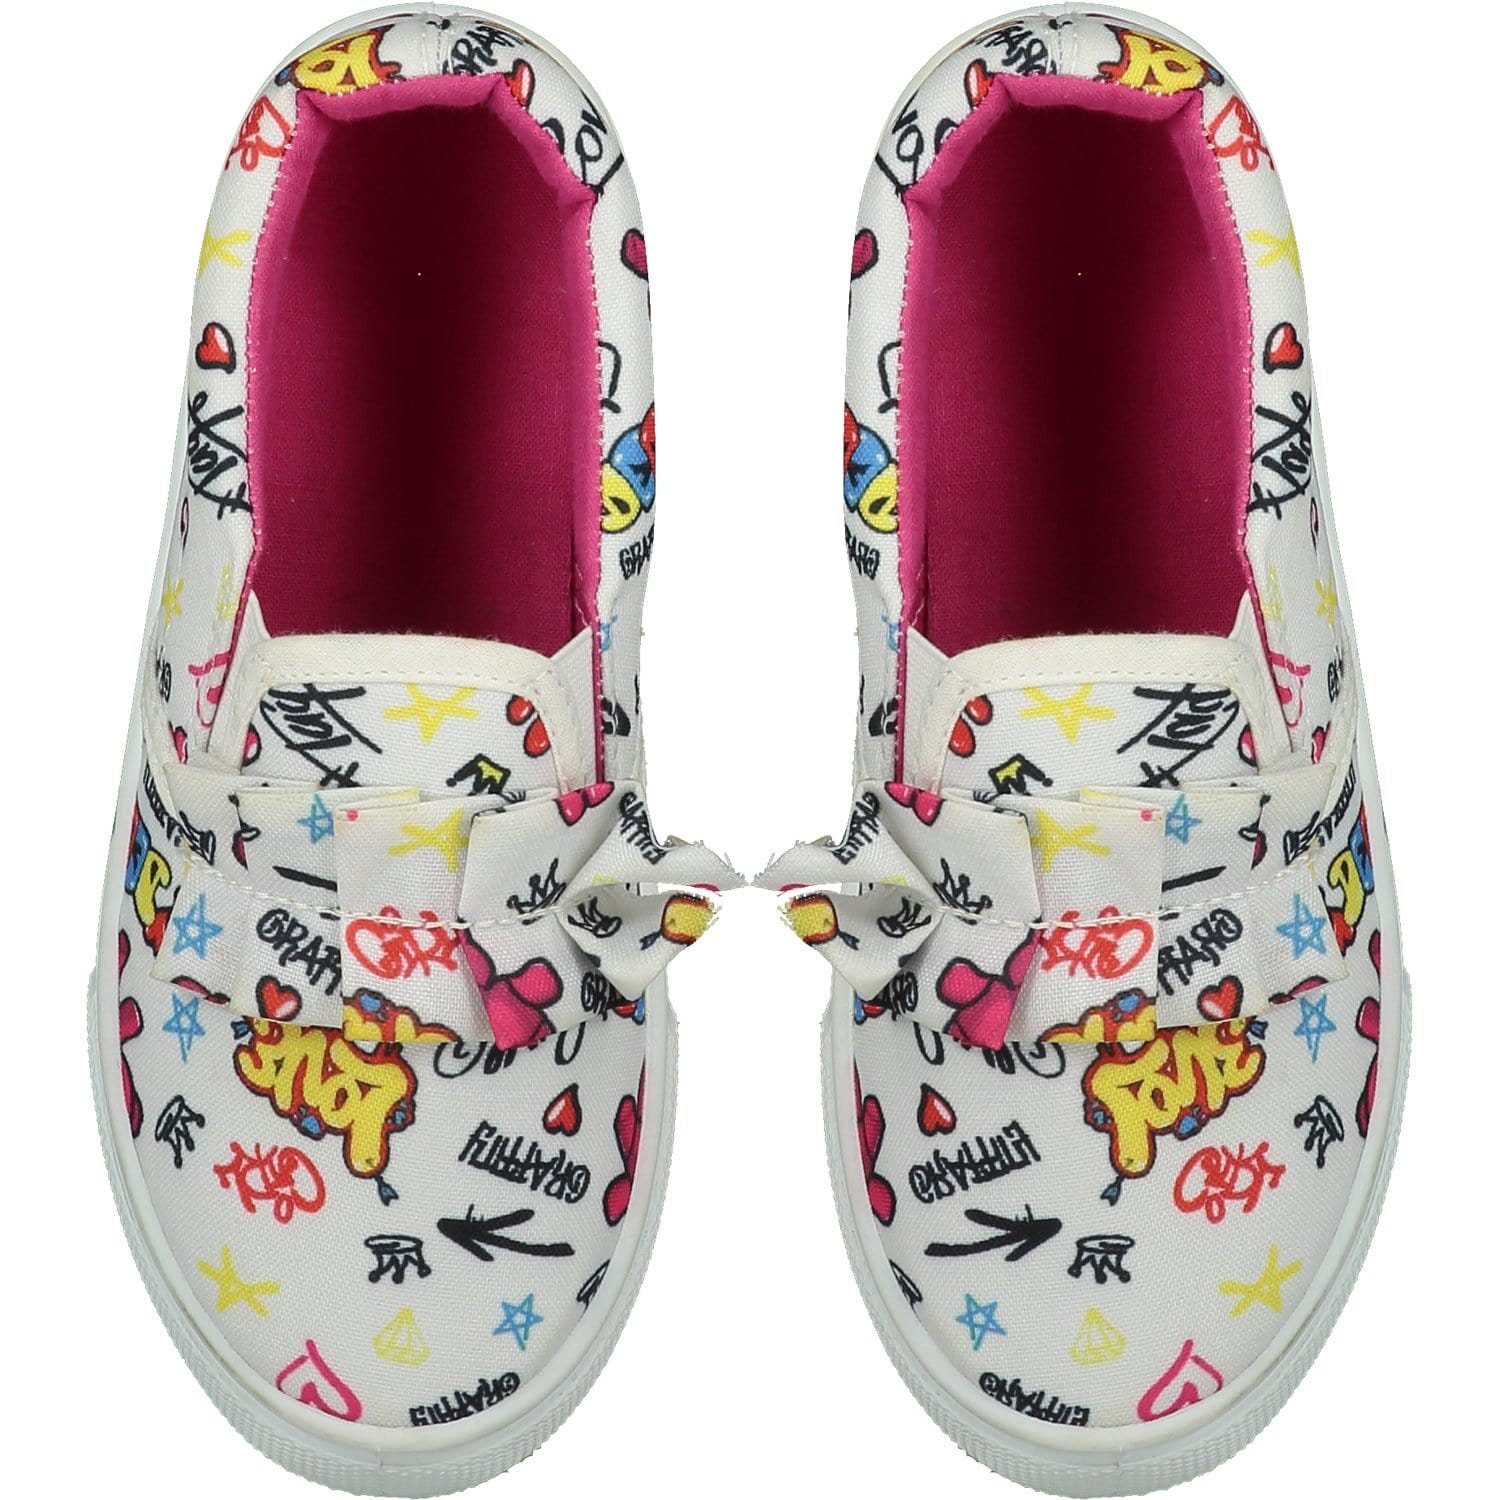 A DEE - Frilly Canvas Slip On Trainer - Lipstick Pink